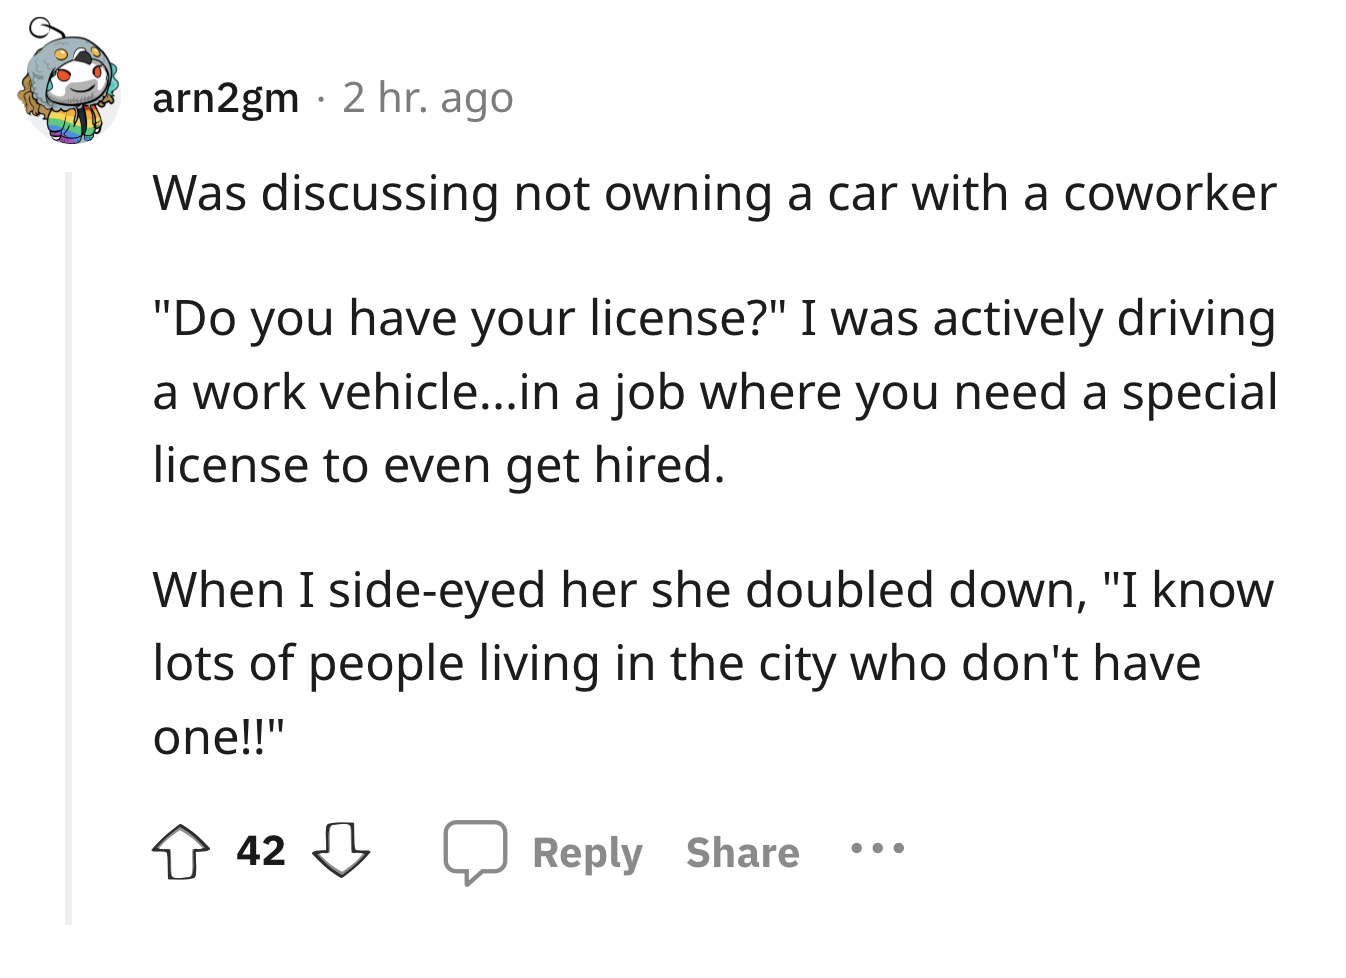 angle - arn2gm 2 hr. ago Was discussing not owning a car with a coworker "Do you have your license?" I was actively driving a work vehicle...in a job where you need a special license to even get hired. When I sideeyed her she doubled down, "I know lots of